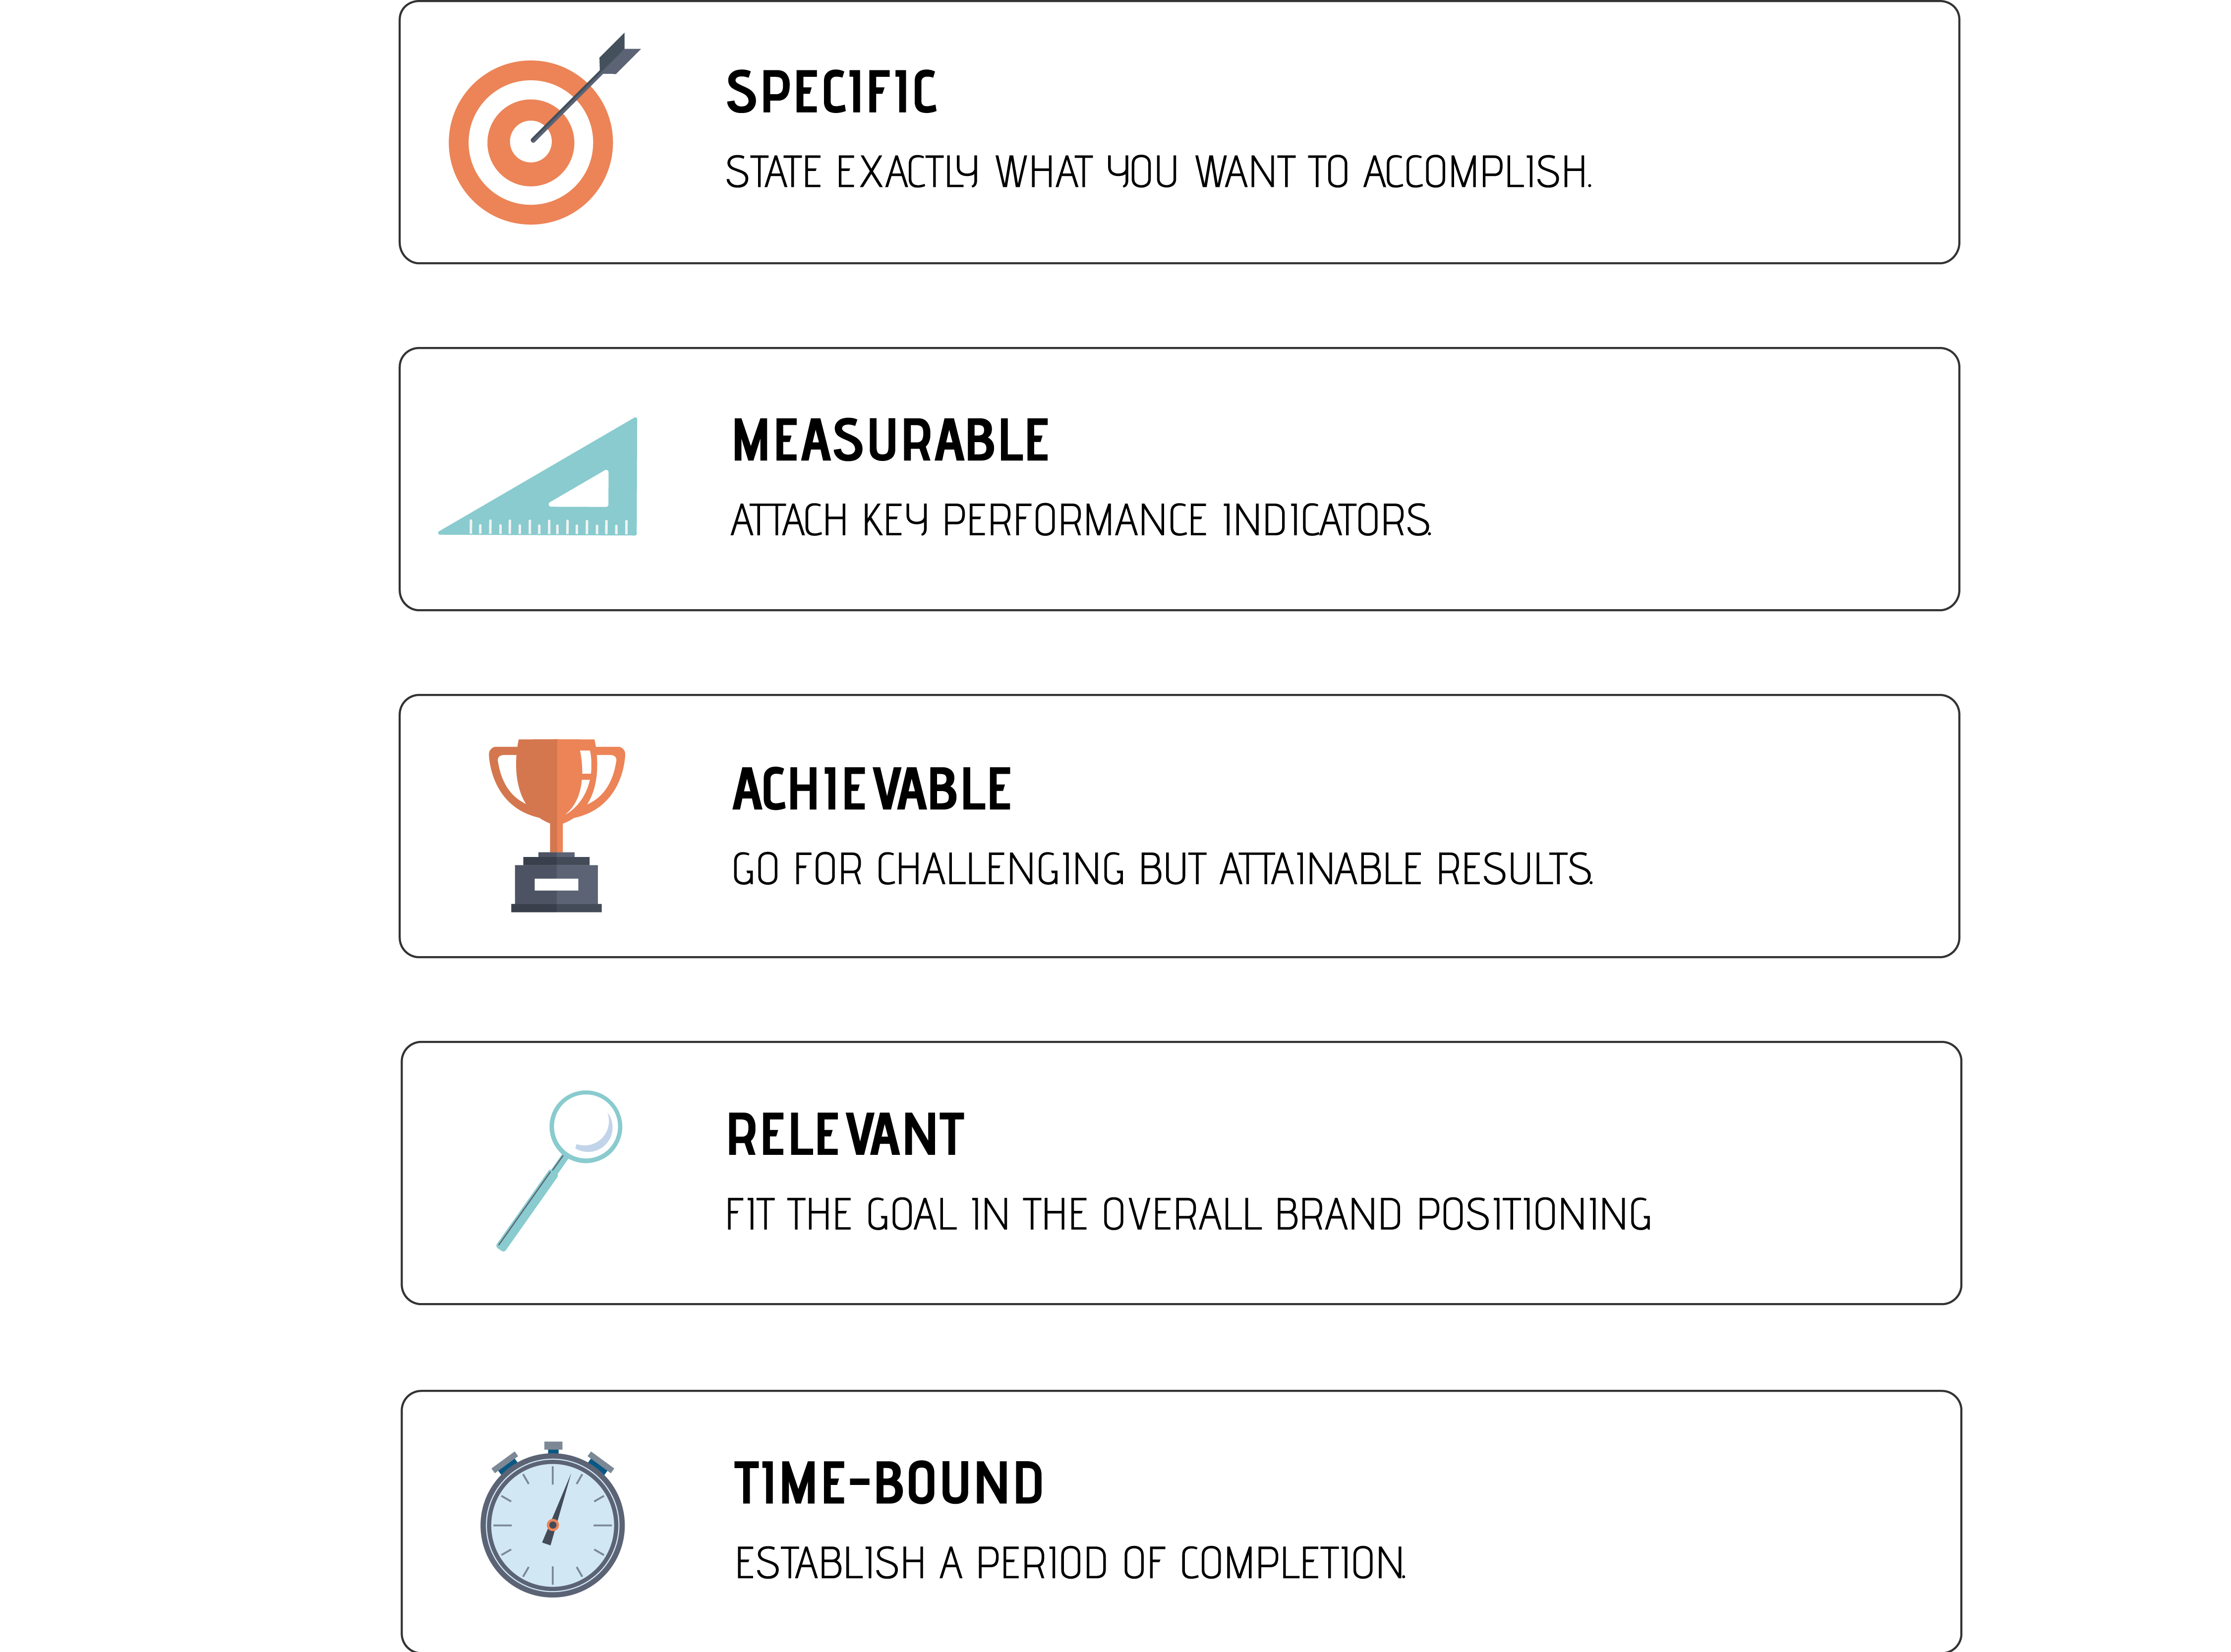 SMART Brand Goals Framework Table Image With Icons.